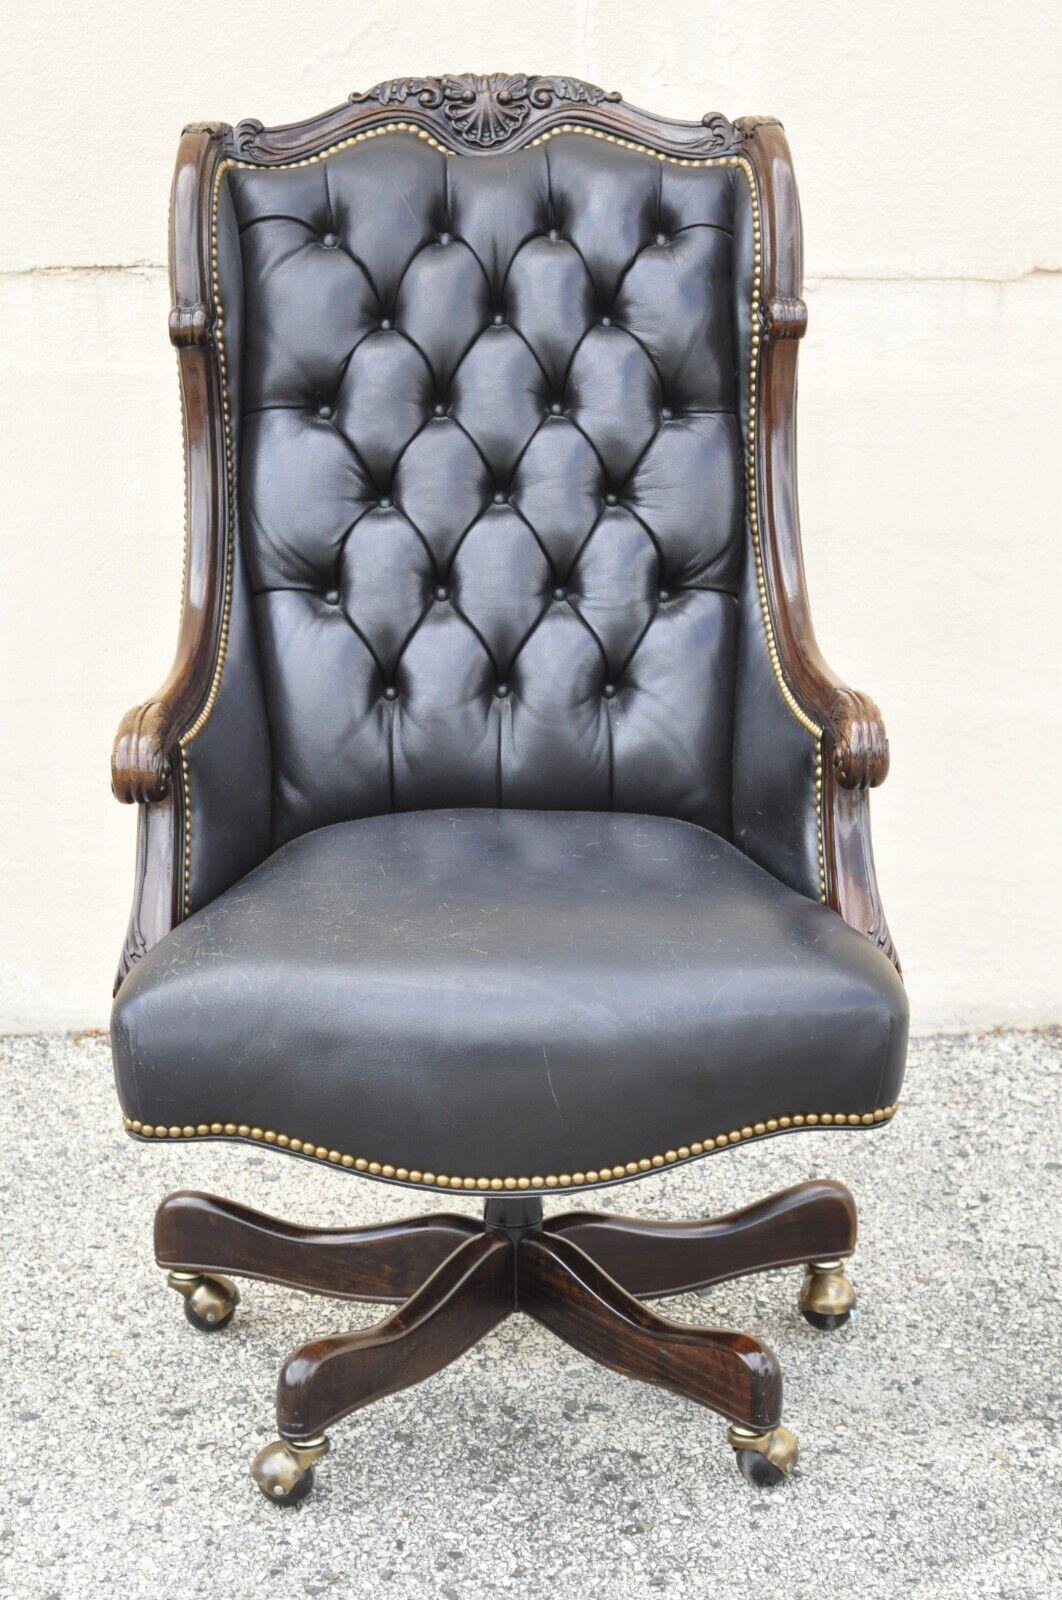 Hancock & Moore Oakley Black Leather Tufted Swivel Executive Office Desk Chair. Item features Black leather button tufted upholstery, adjustable height, rolling casters, original labels, quality American craftsmanship. Original retail price over